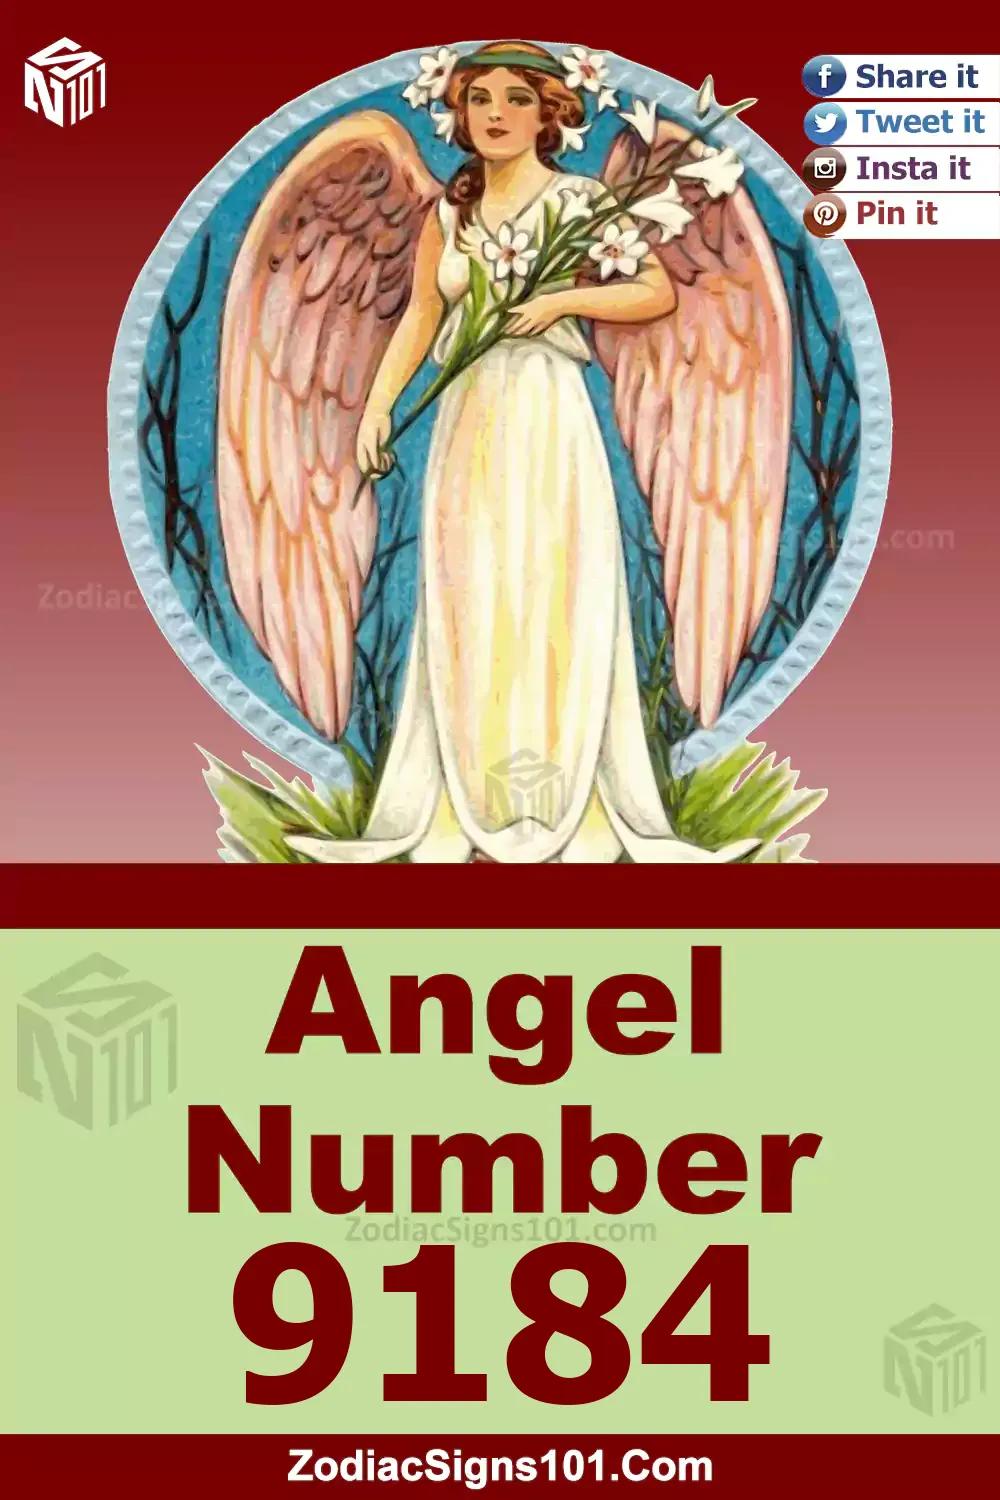 9184 Angel Number Meaning